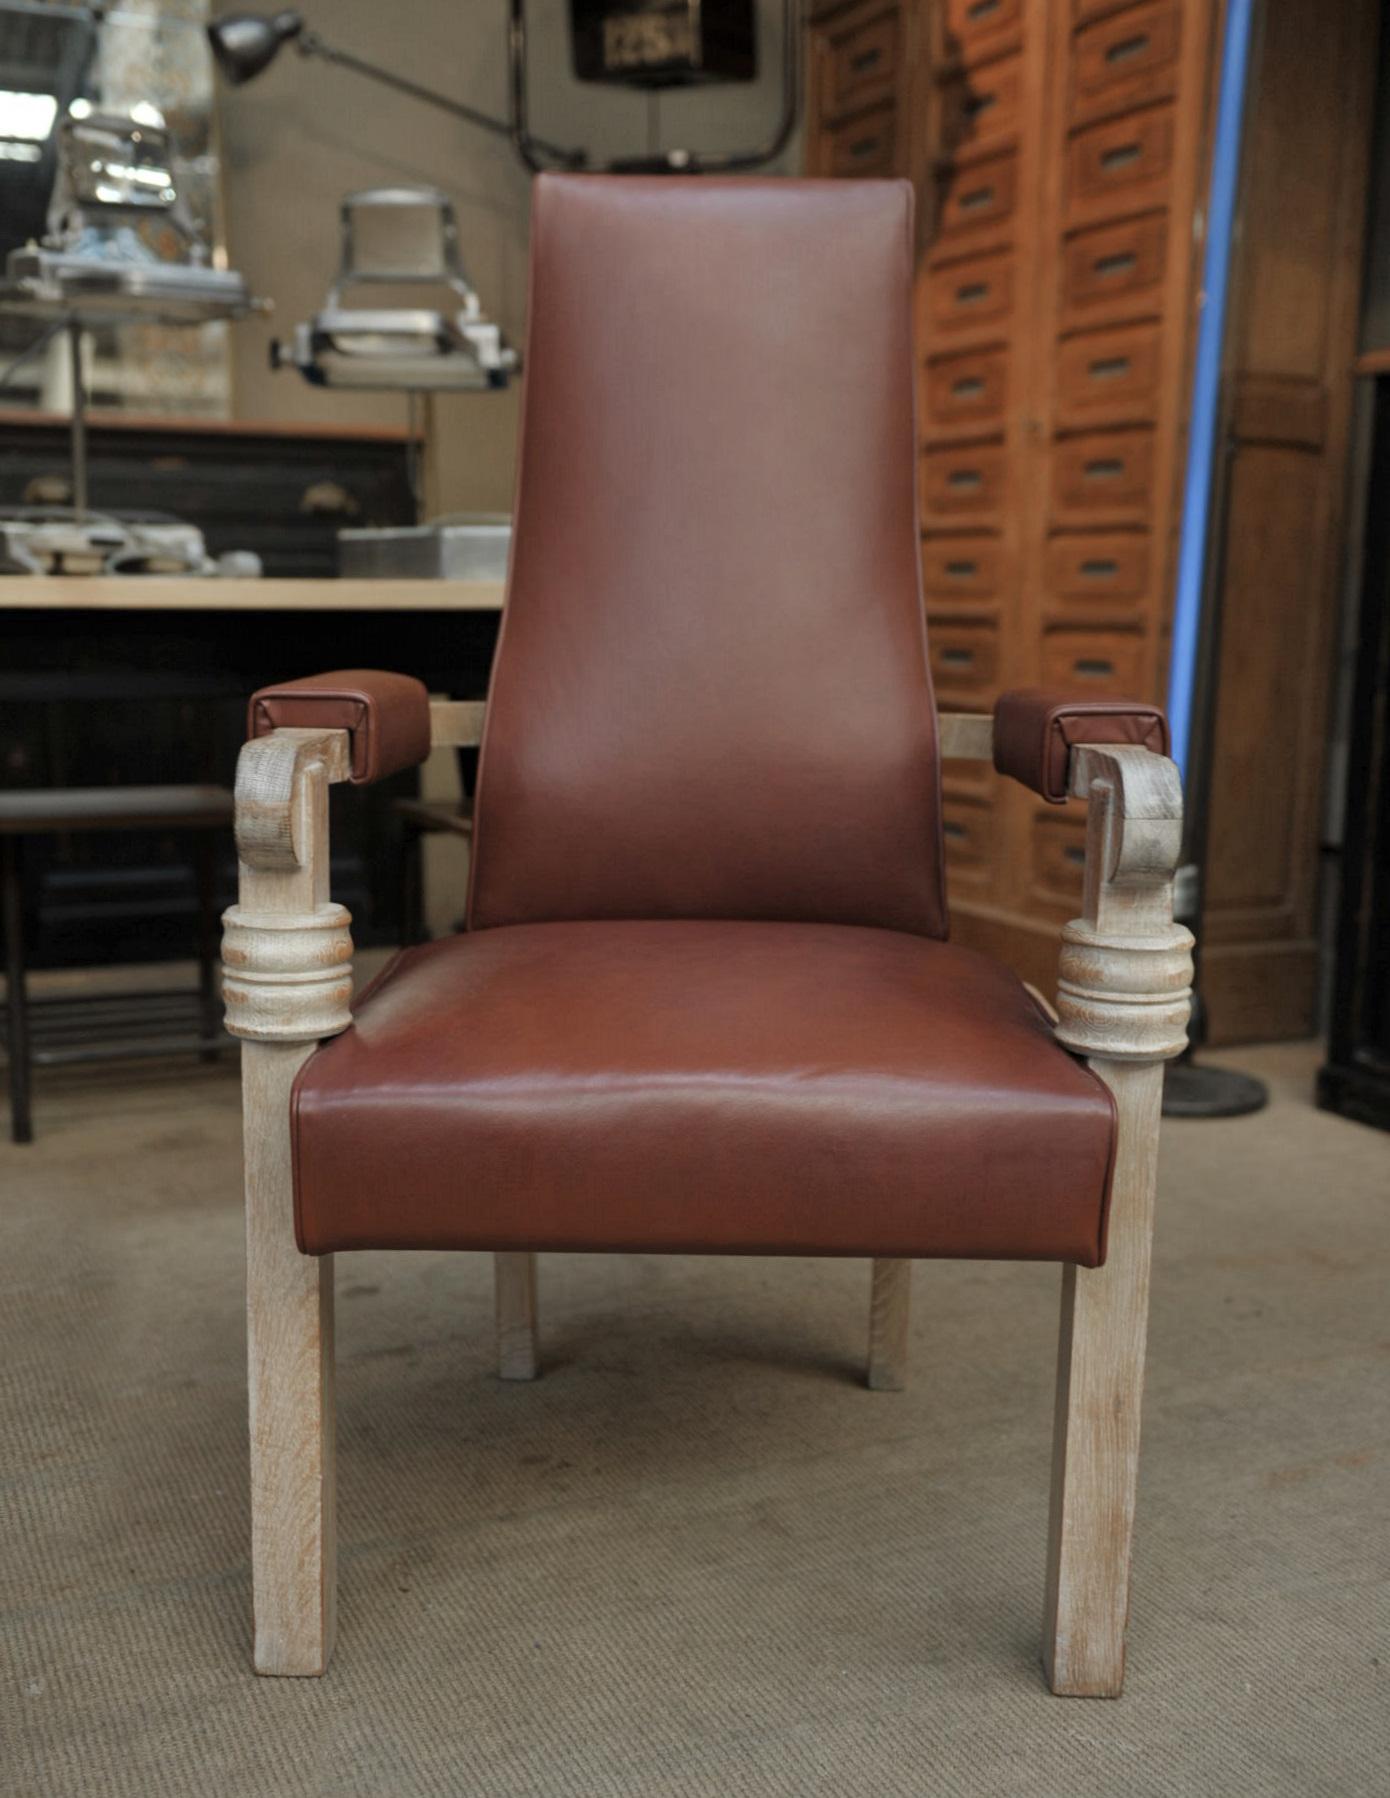 1940s French high back oak armchair by Charles Dudouyt.
Newly upholstered with very nice brown leather.
All in excellent condition.
